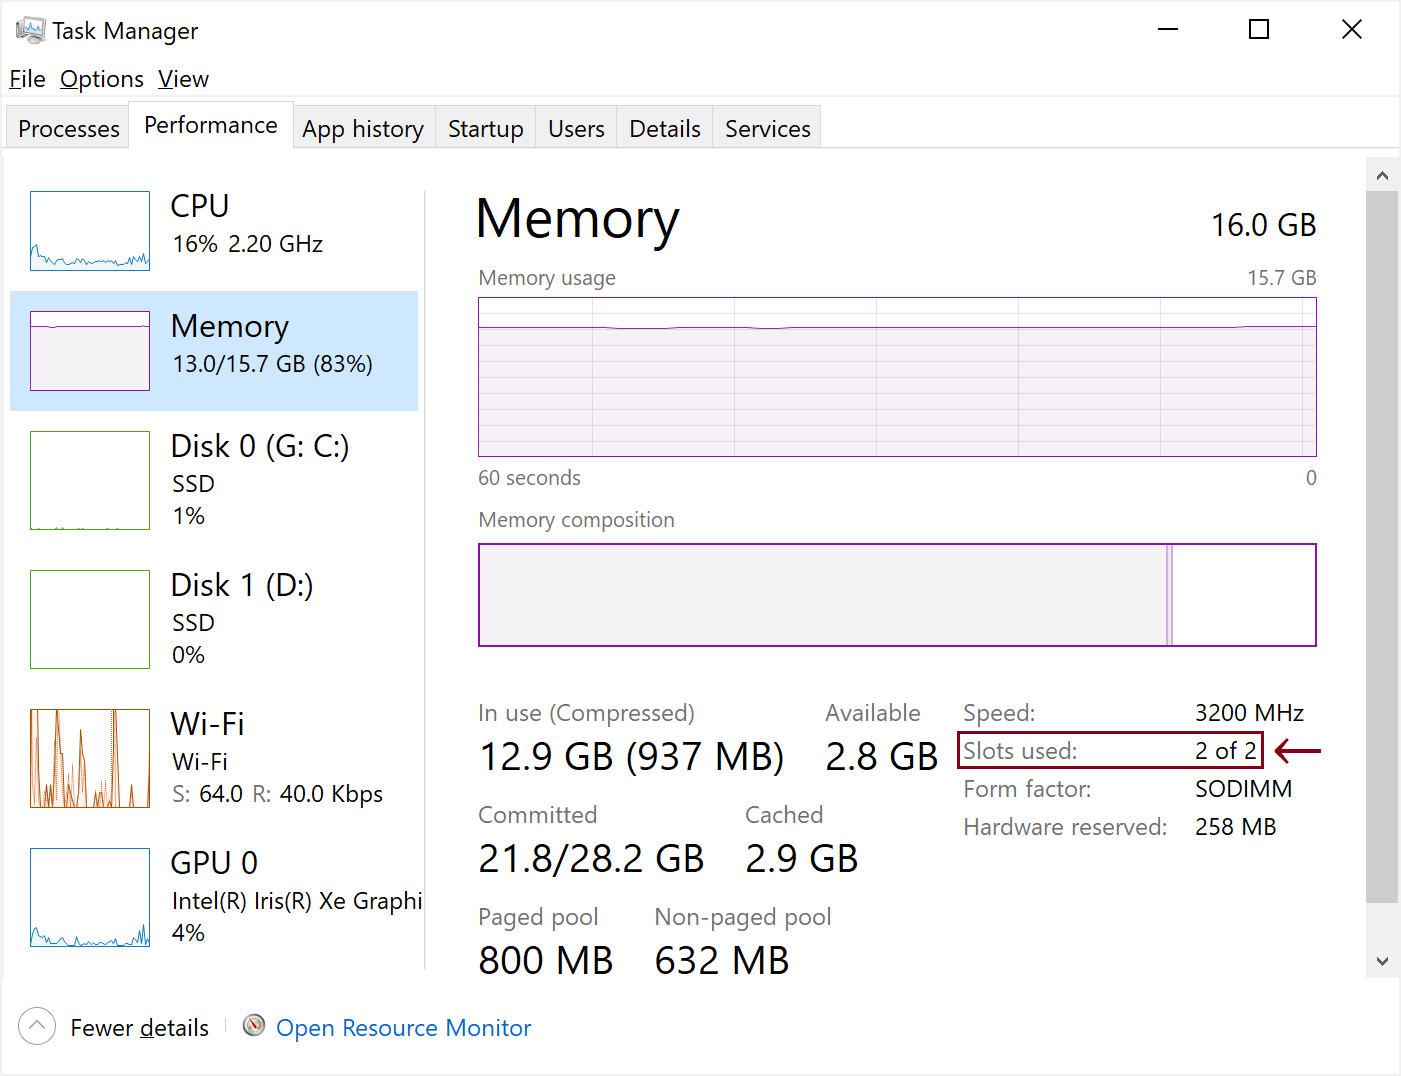 Screenshots of Task Manager, showing 2 of 2 memory slots being occupied.